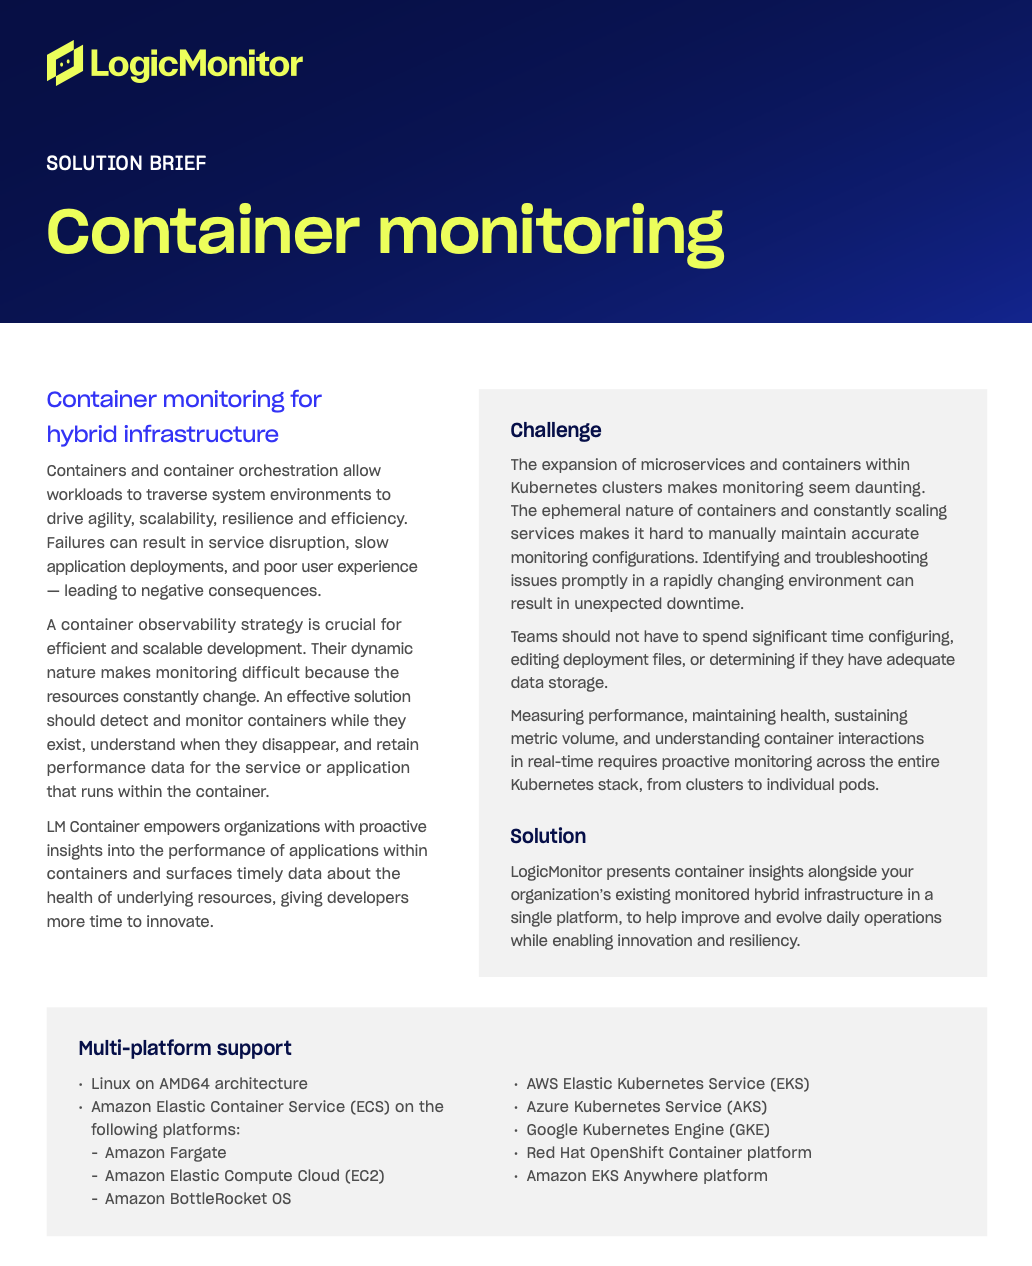 Container monitoring solution brief